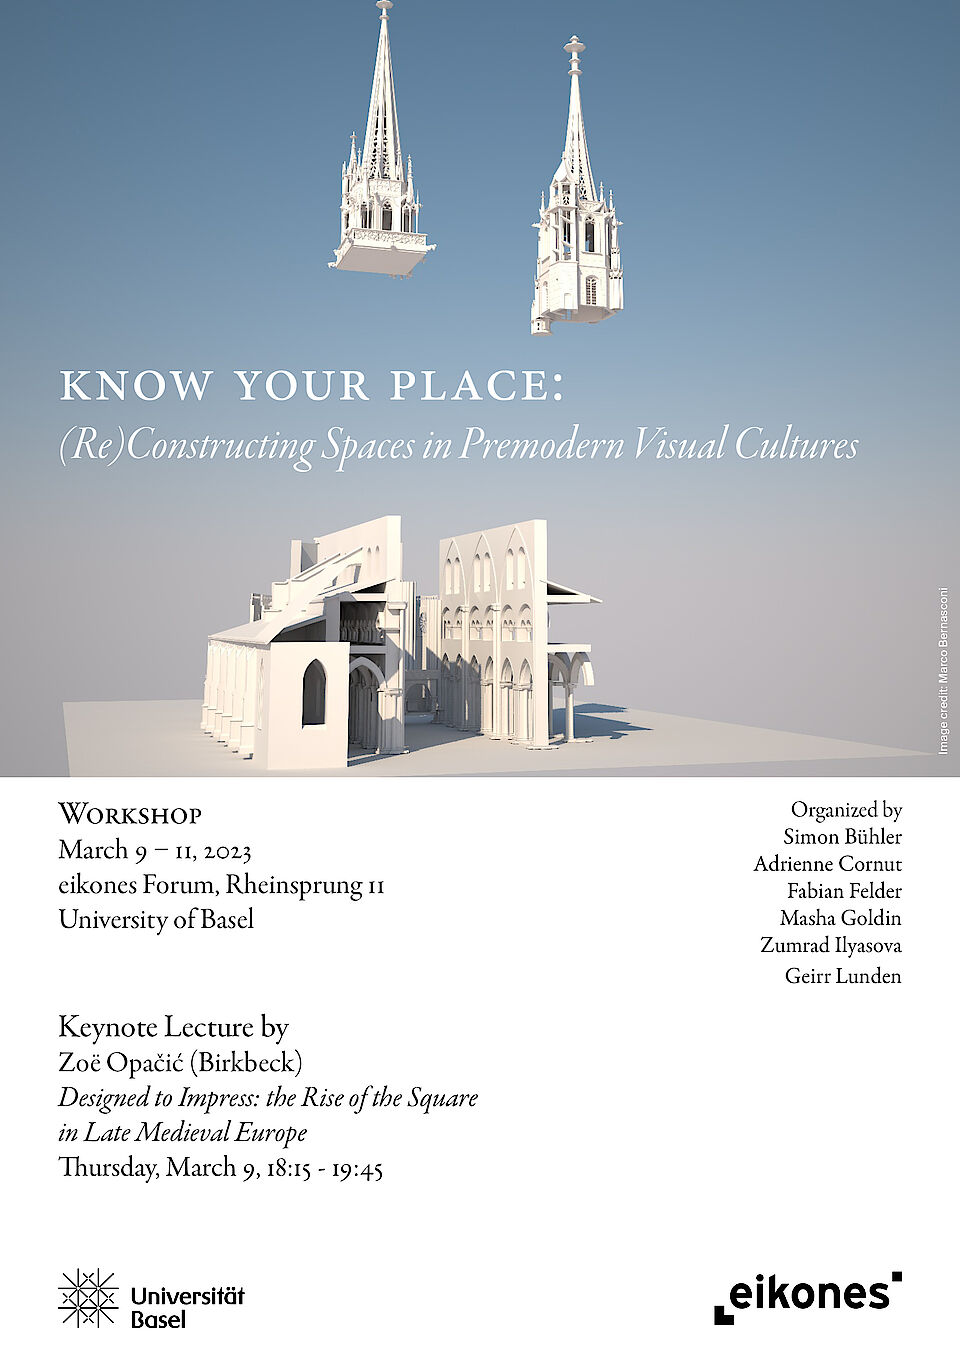 Know Your Place: (Re)Constructing Spaces in Premodern Visual Cultures (Poster)